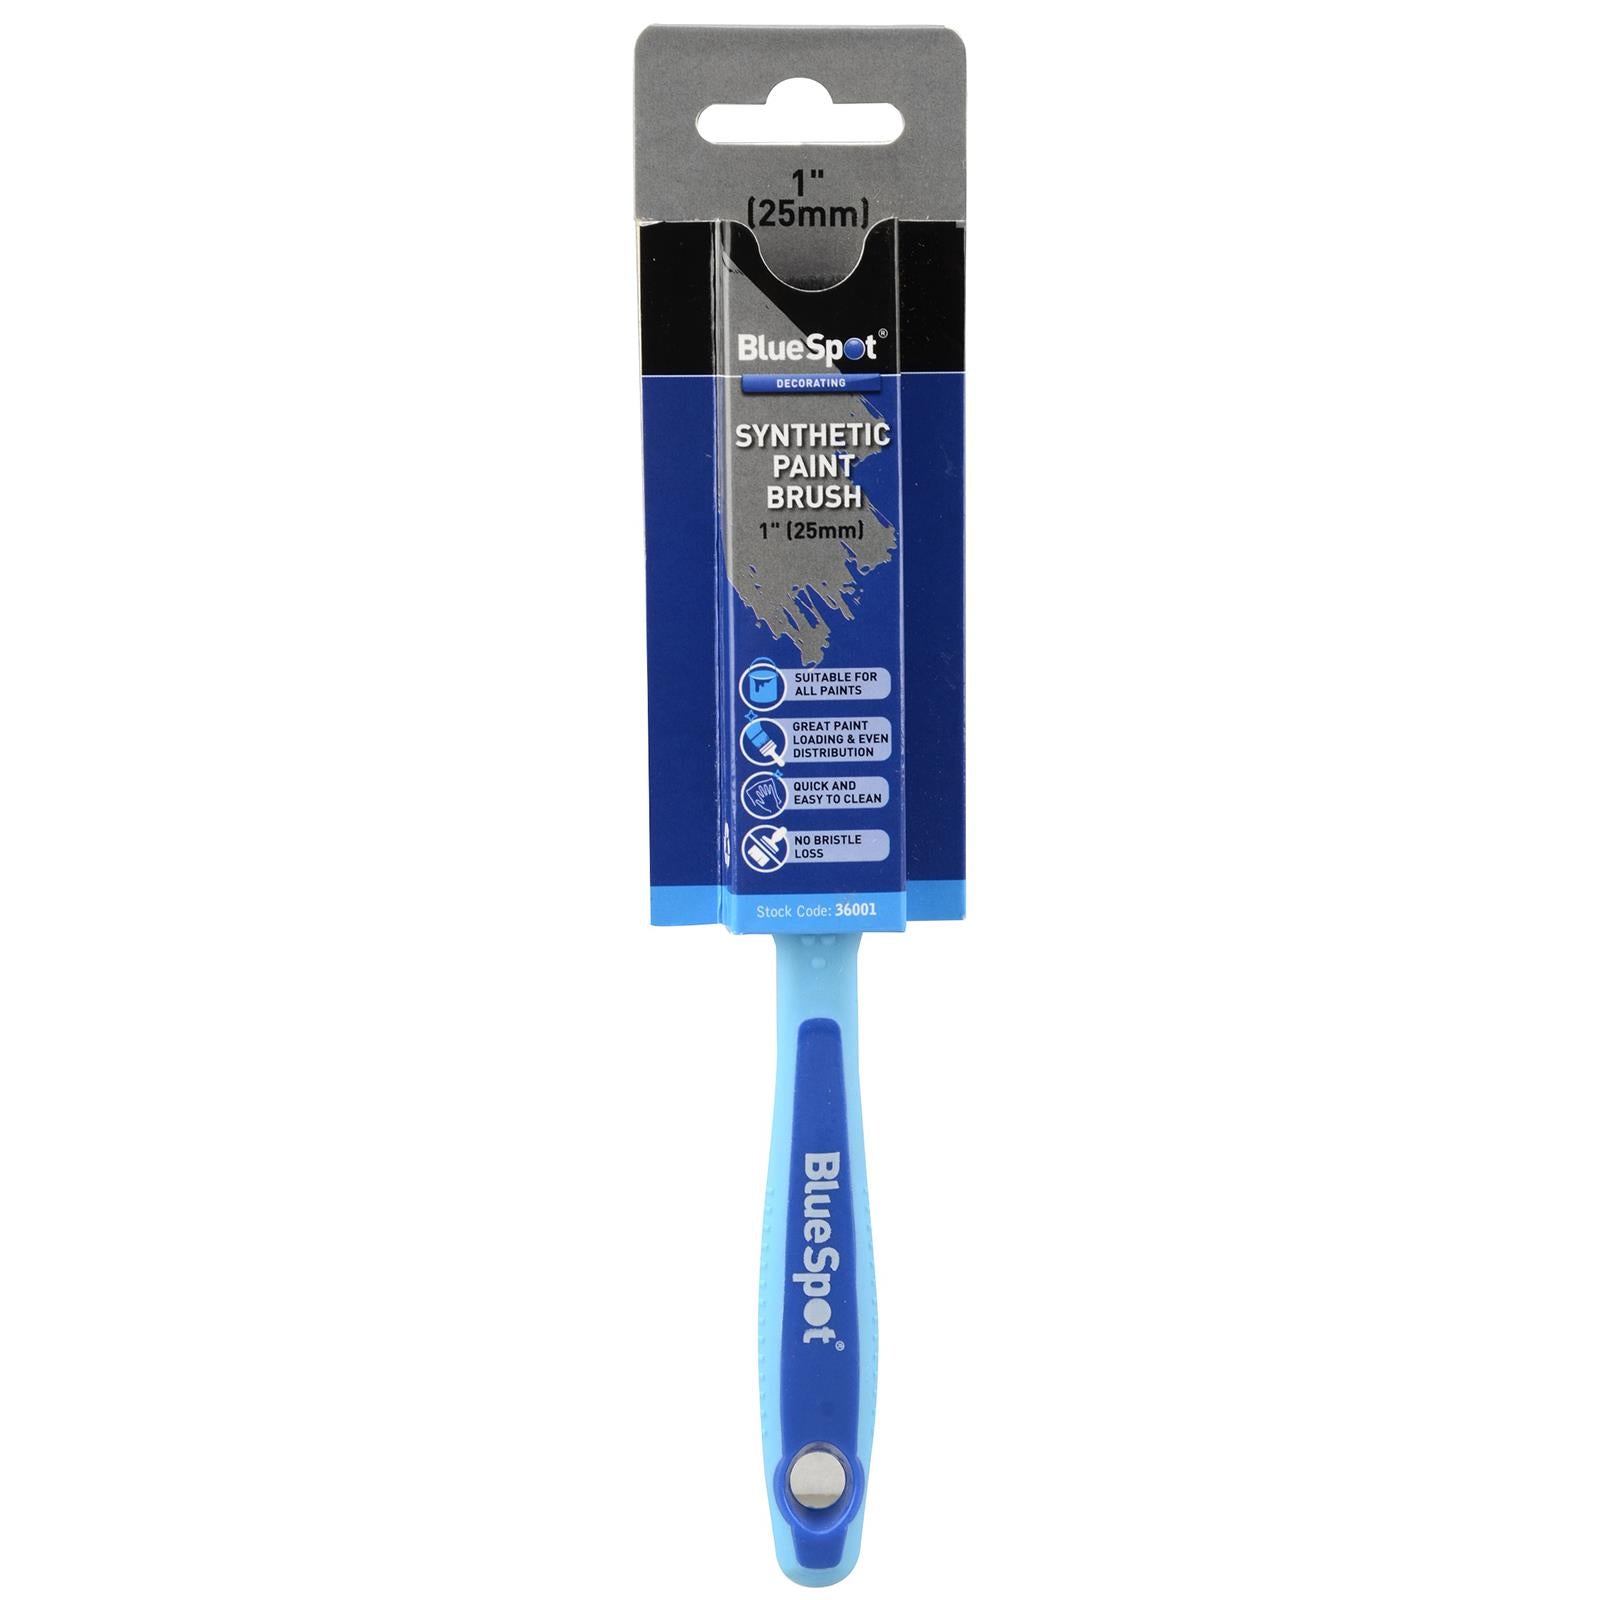 BlueSpot Synthetic Paint Brush with Soft Grip Handle 25mm (1")